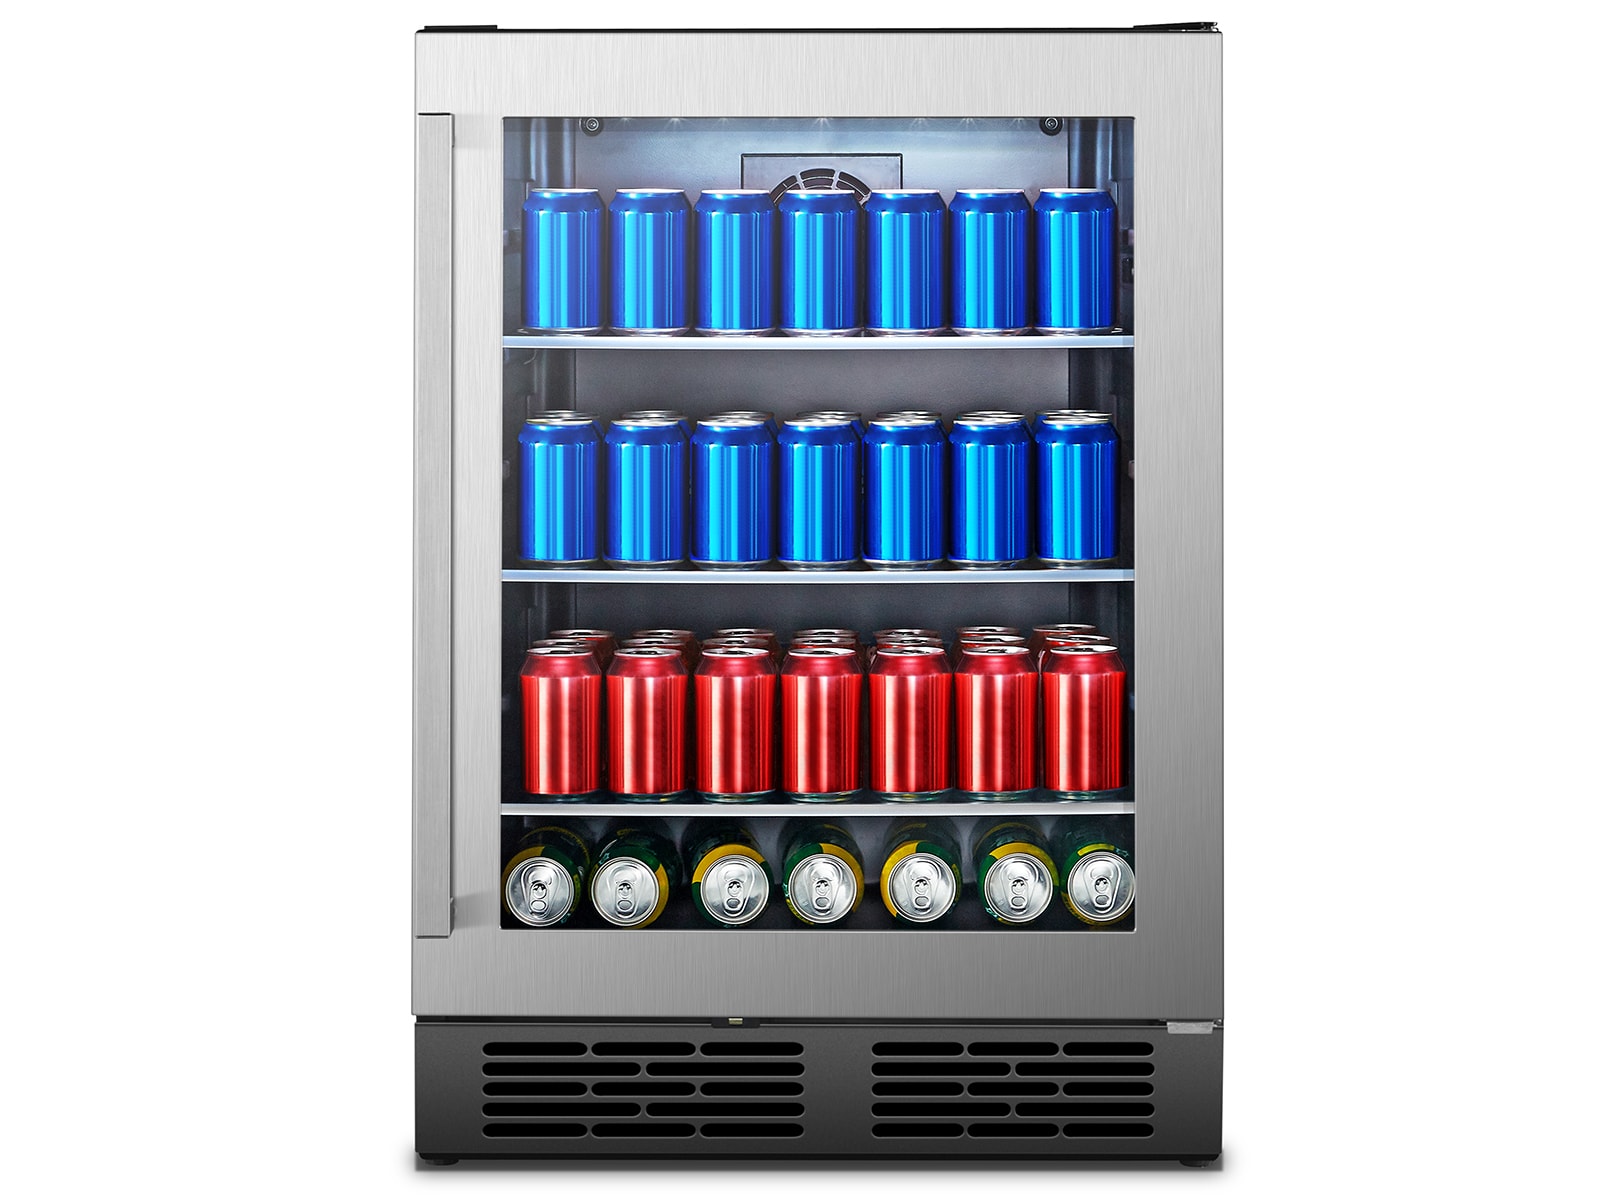 Newair Stone® Brewing 180 Can FlipShelf™ Beverage and Beer Refrigerator,  24” Built-In or Freestanding Wine Cooler with Reversible Shelves, Perfect  for